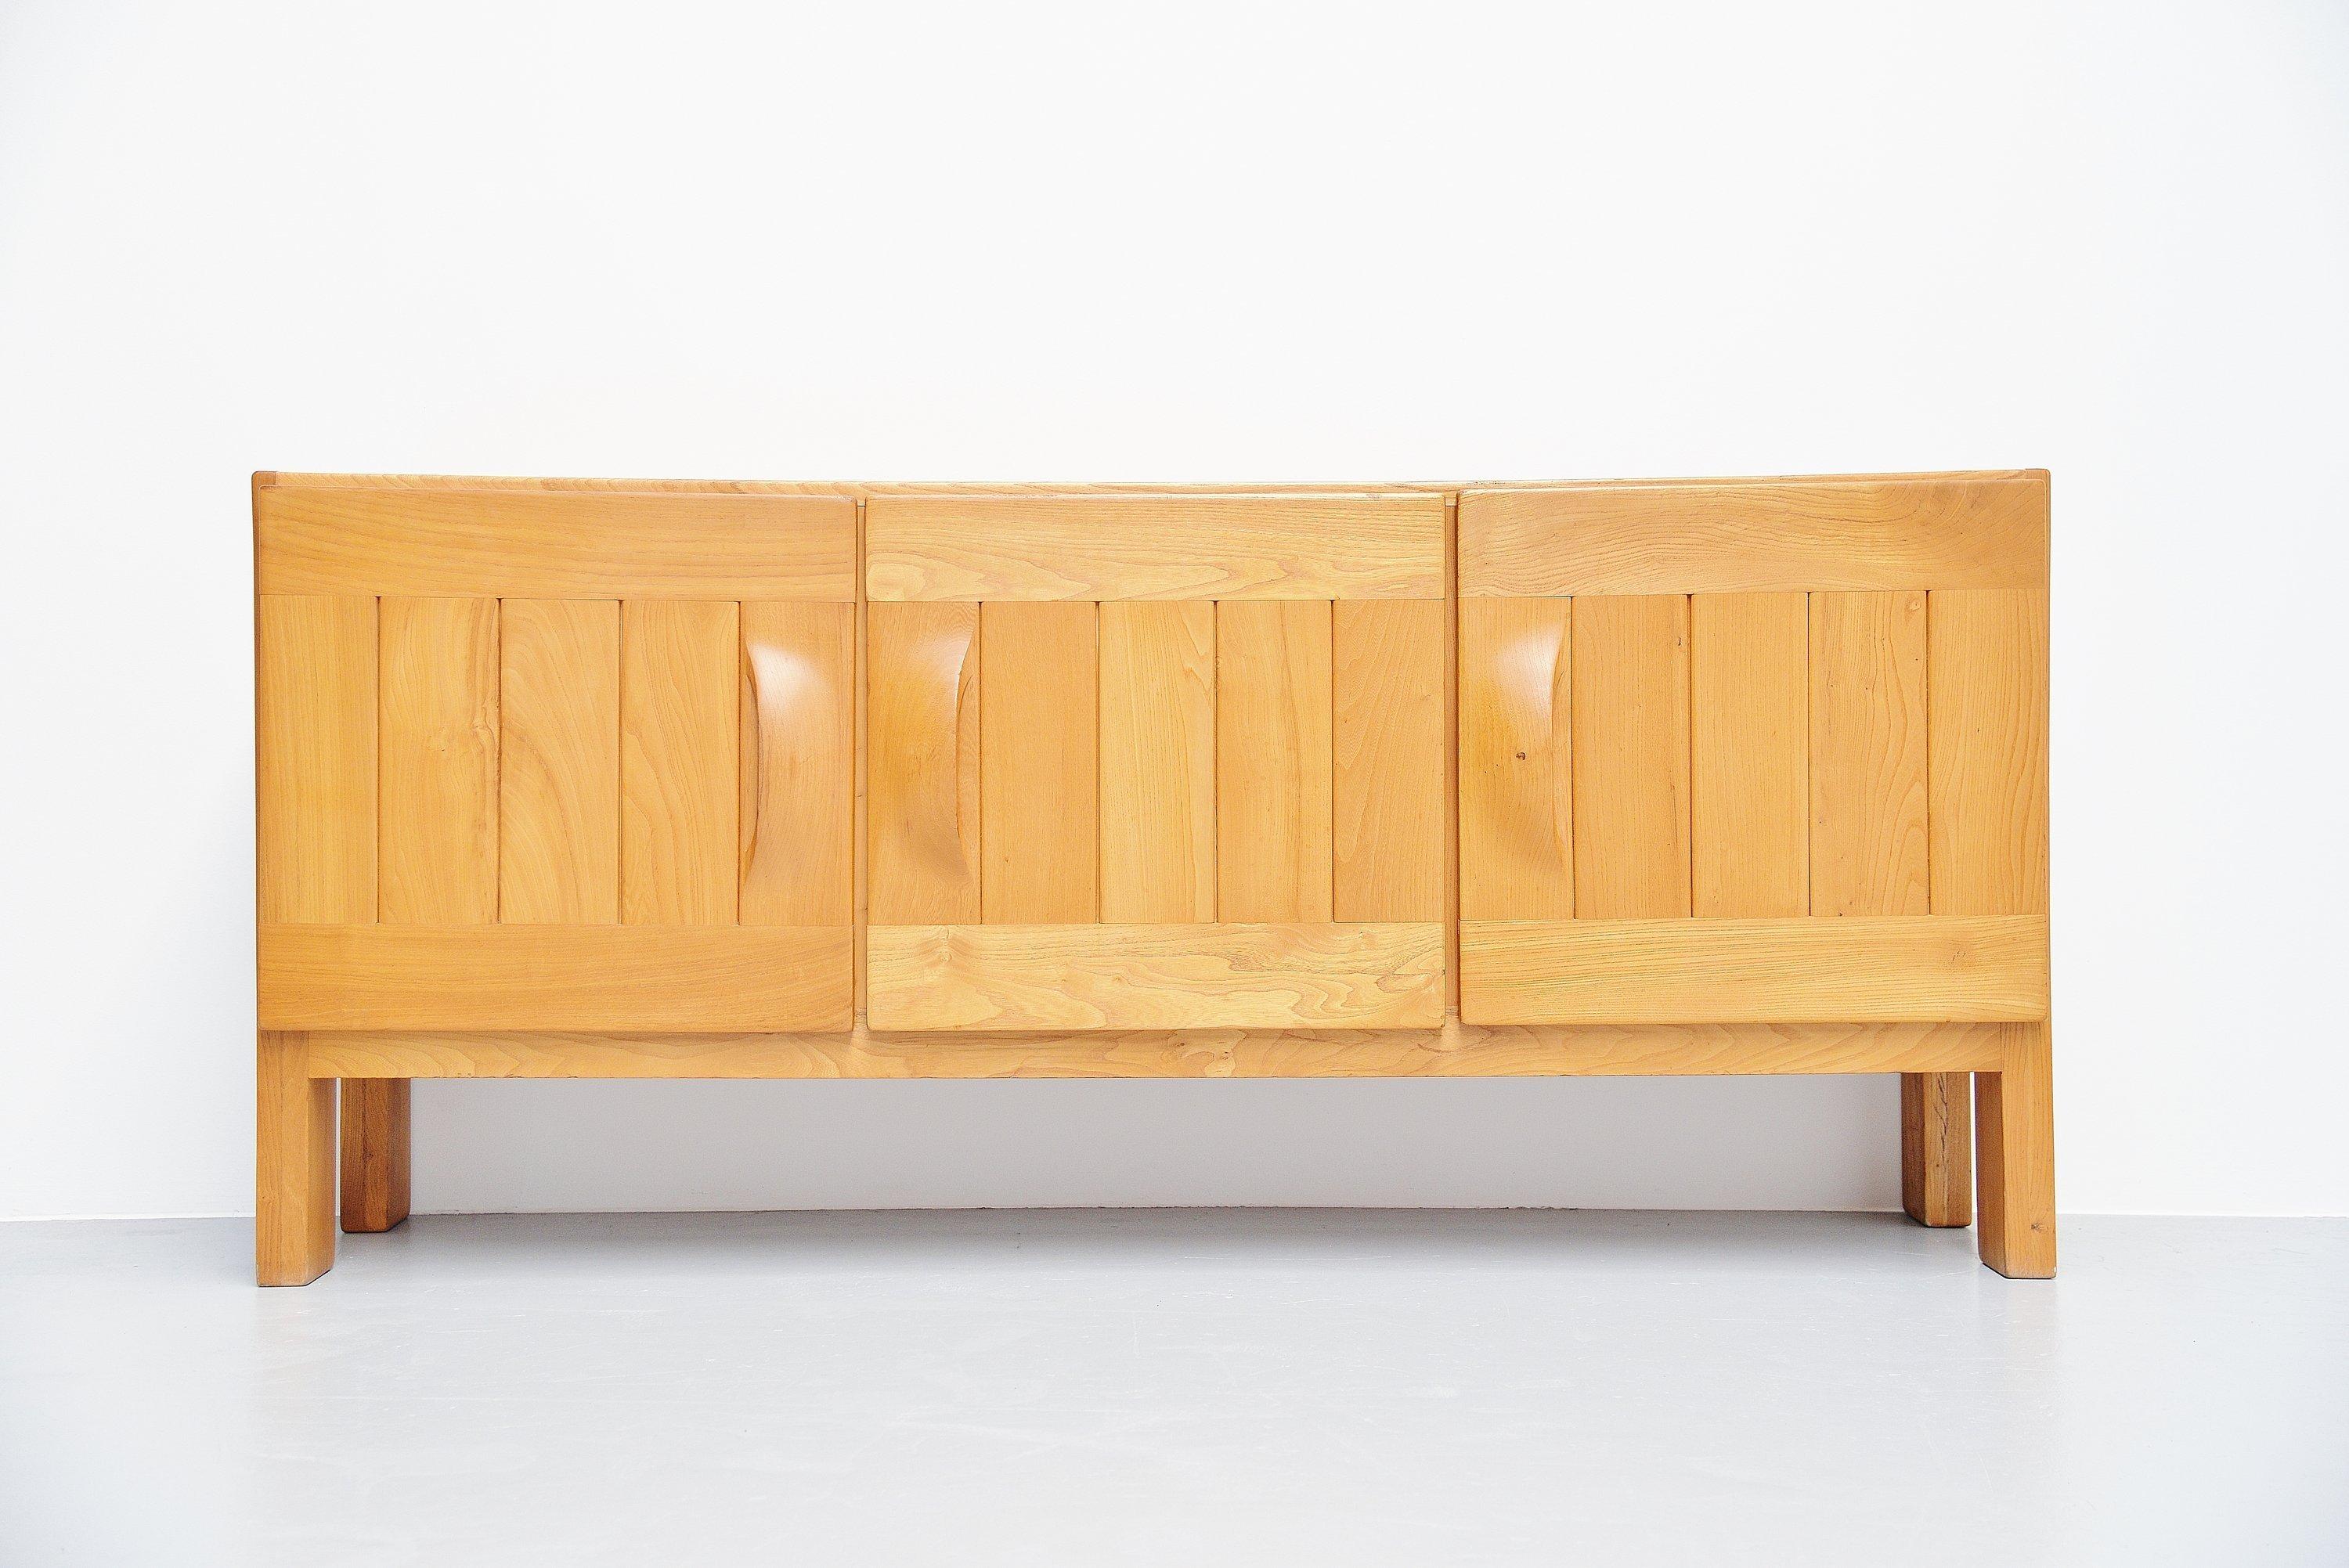 Large Brutalist sideboard designed and manufactured by Maison Regain, France, 1970. This 3-door sideboard was made of solid elm and this is crafted into perfection. Founder of Maison Regain was the previous carpenter of Pierre Chapo. We can see why